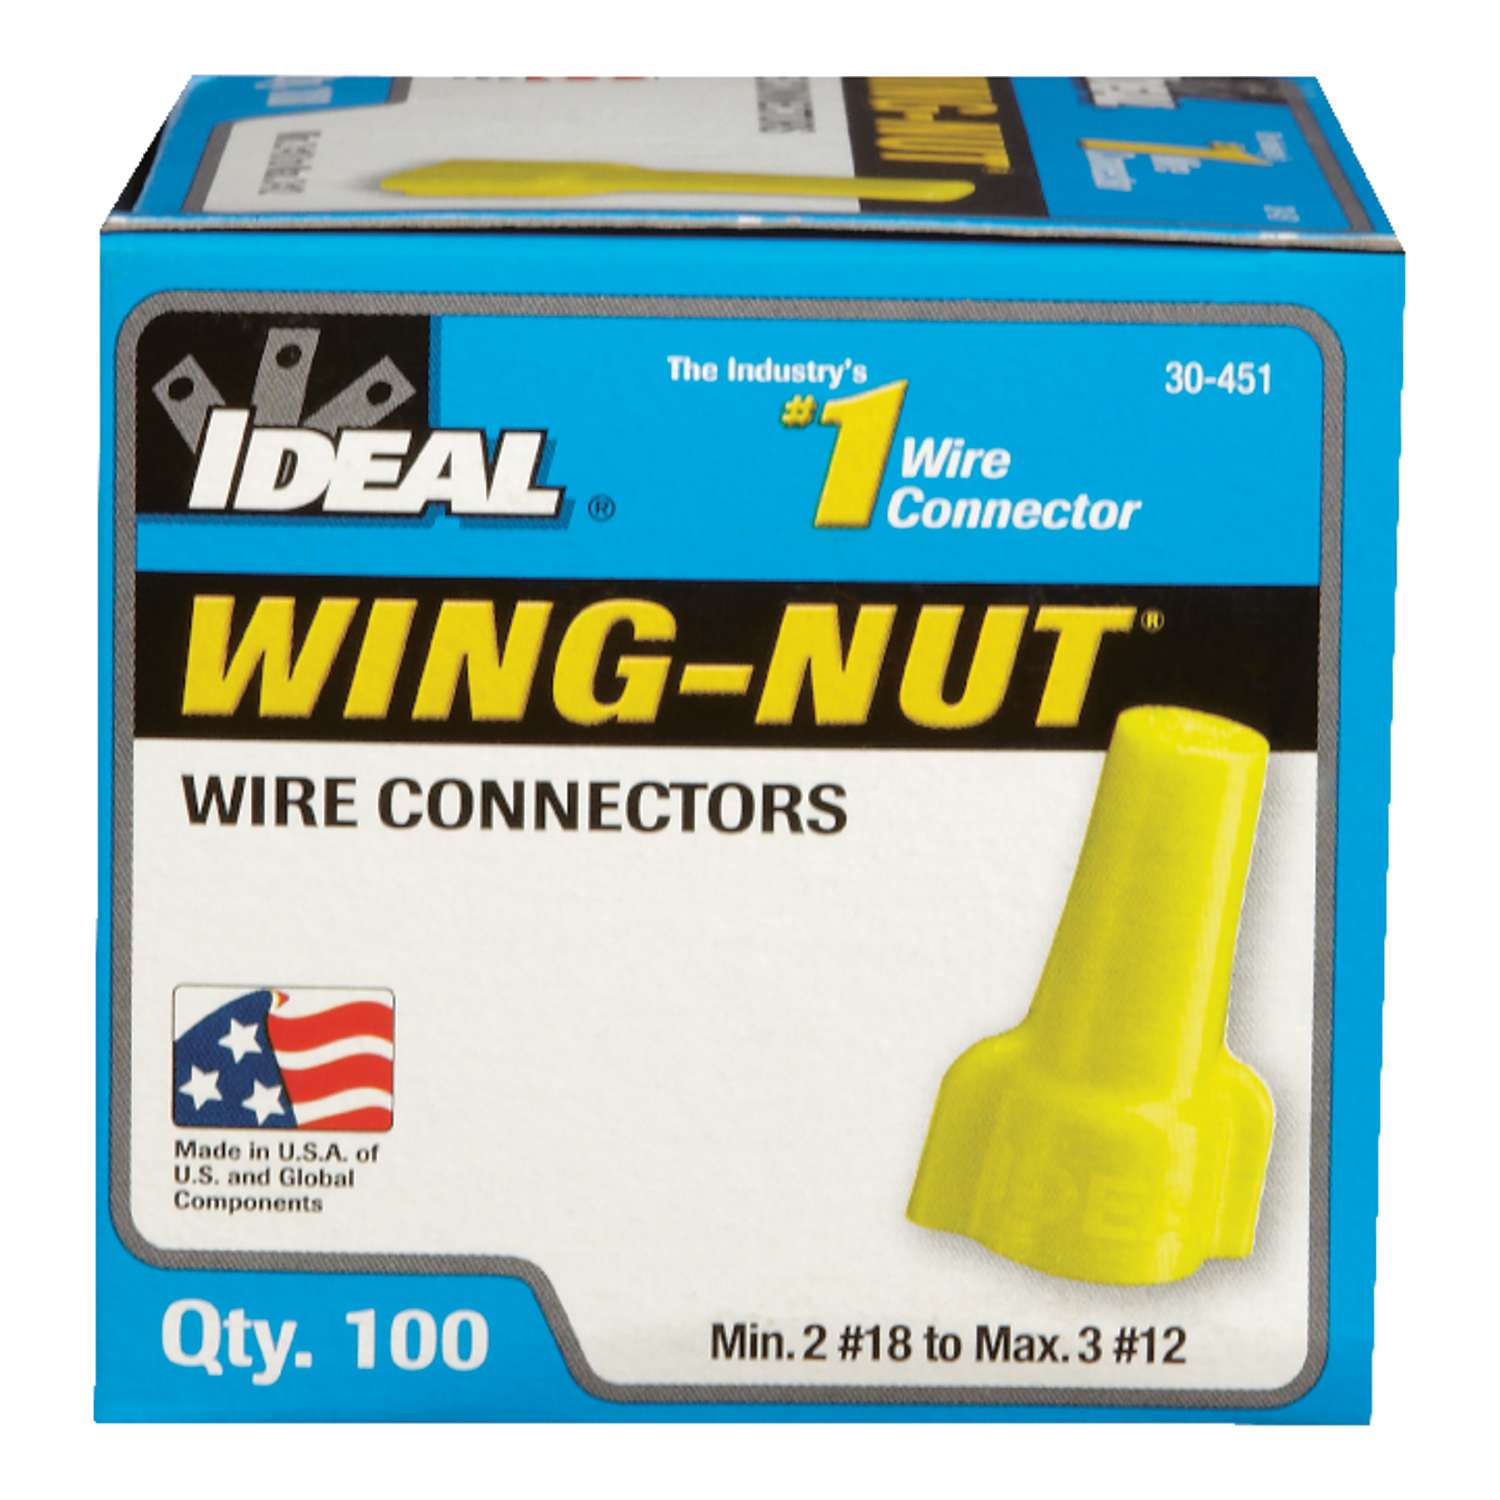 Details about   2,500 WIRE CONNECTORS RED WINGED SCREW-ON NUTS UL 2500/BOX FAST SHIPPING